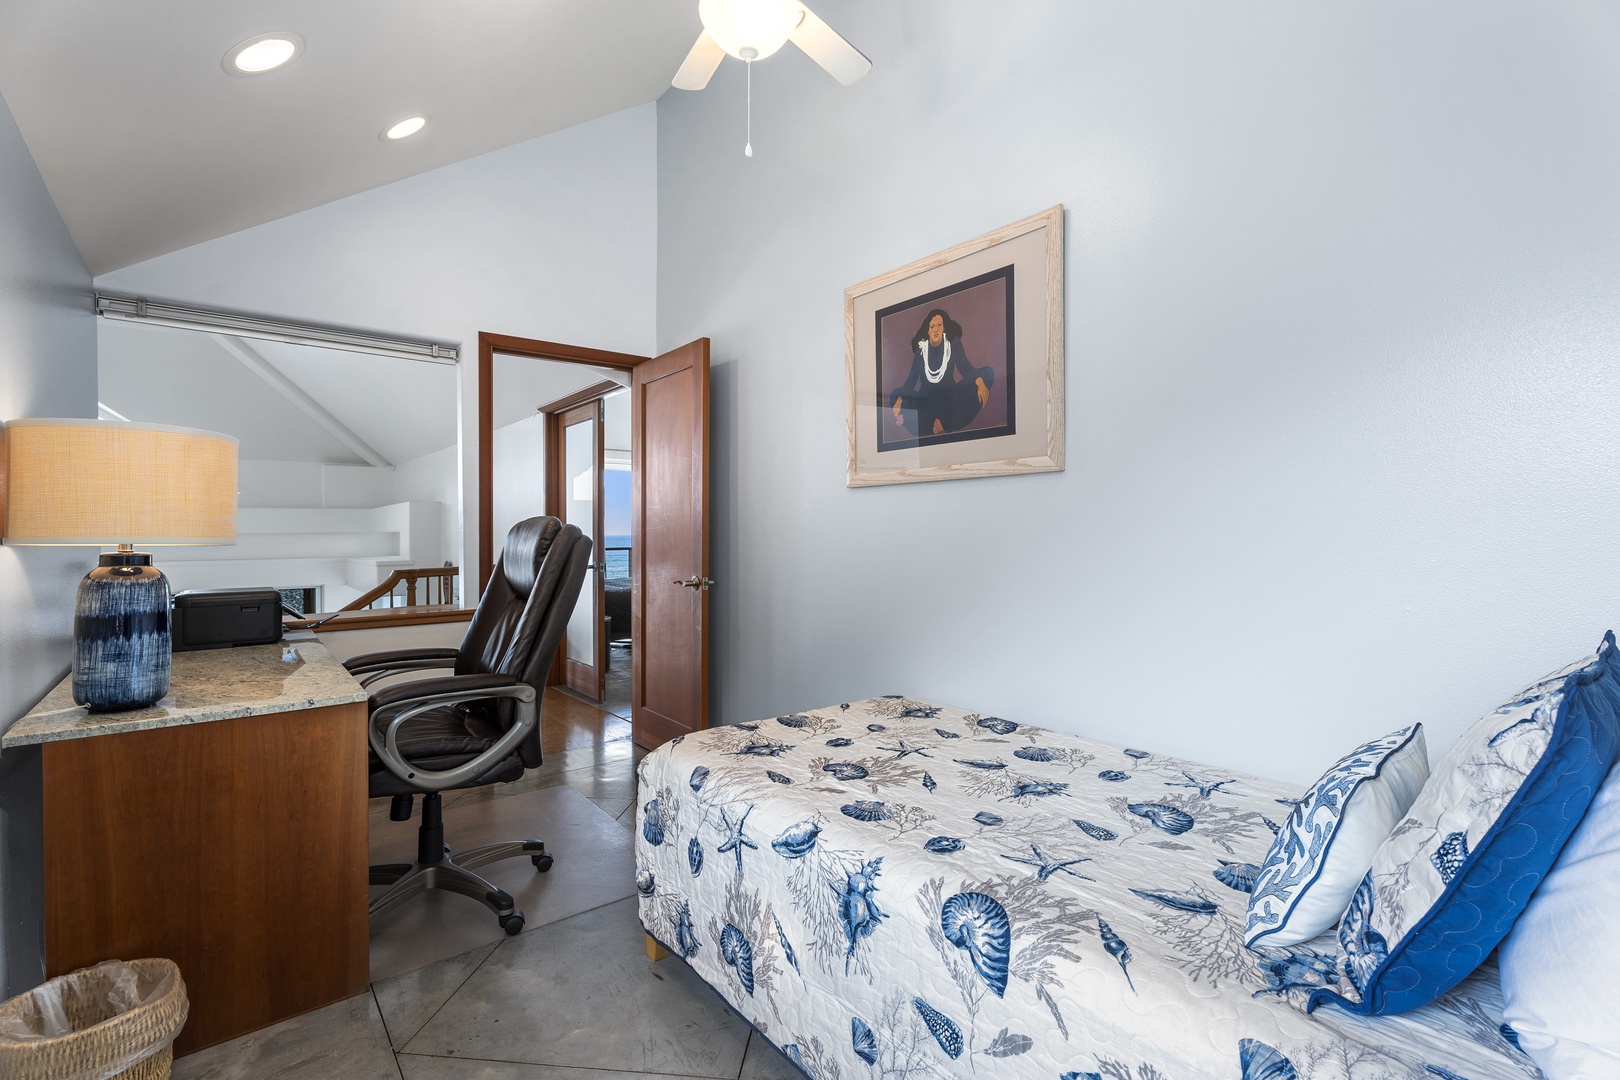 Kailua-Kona Vacation Rentals, Hale Kope Kai - Great space for those who have to work on vacation